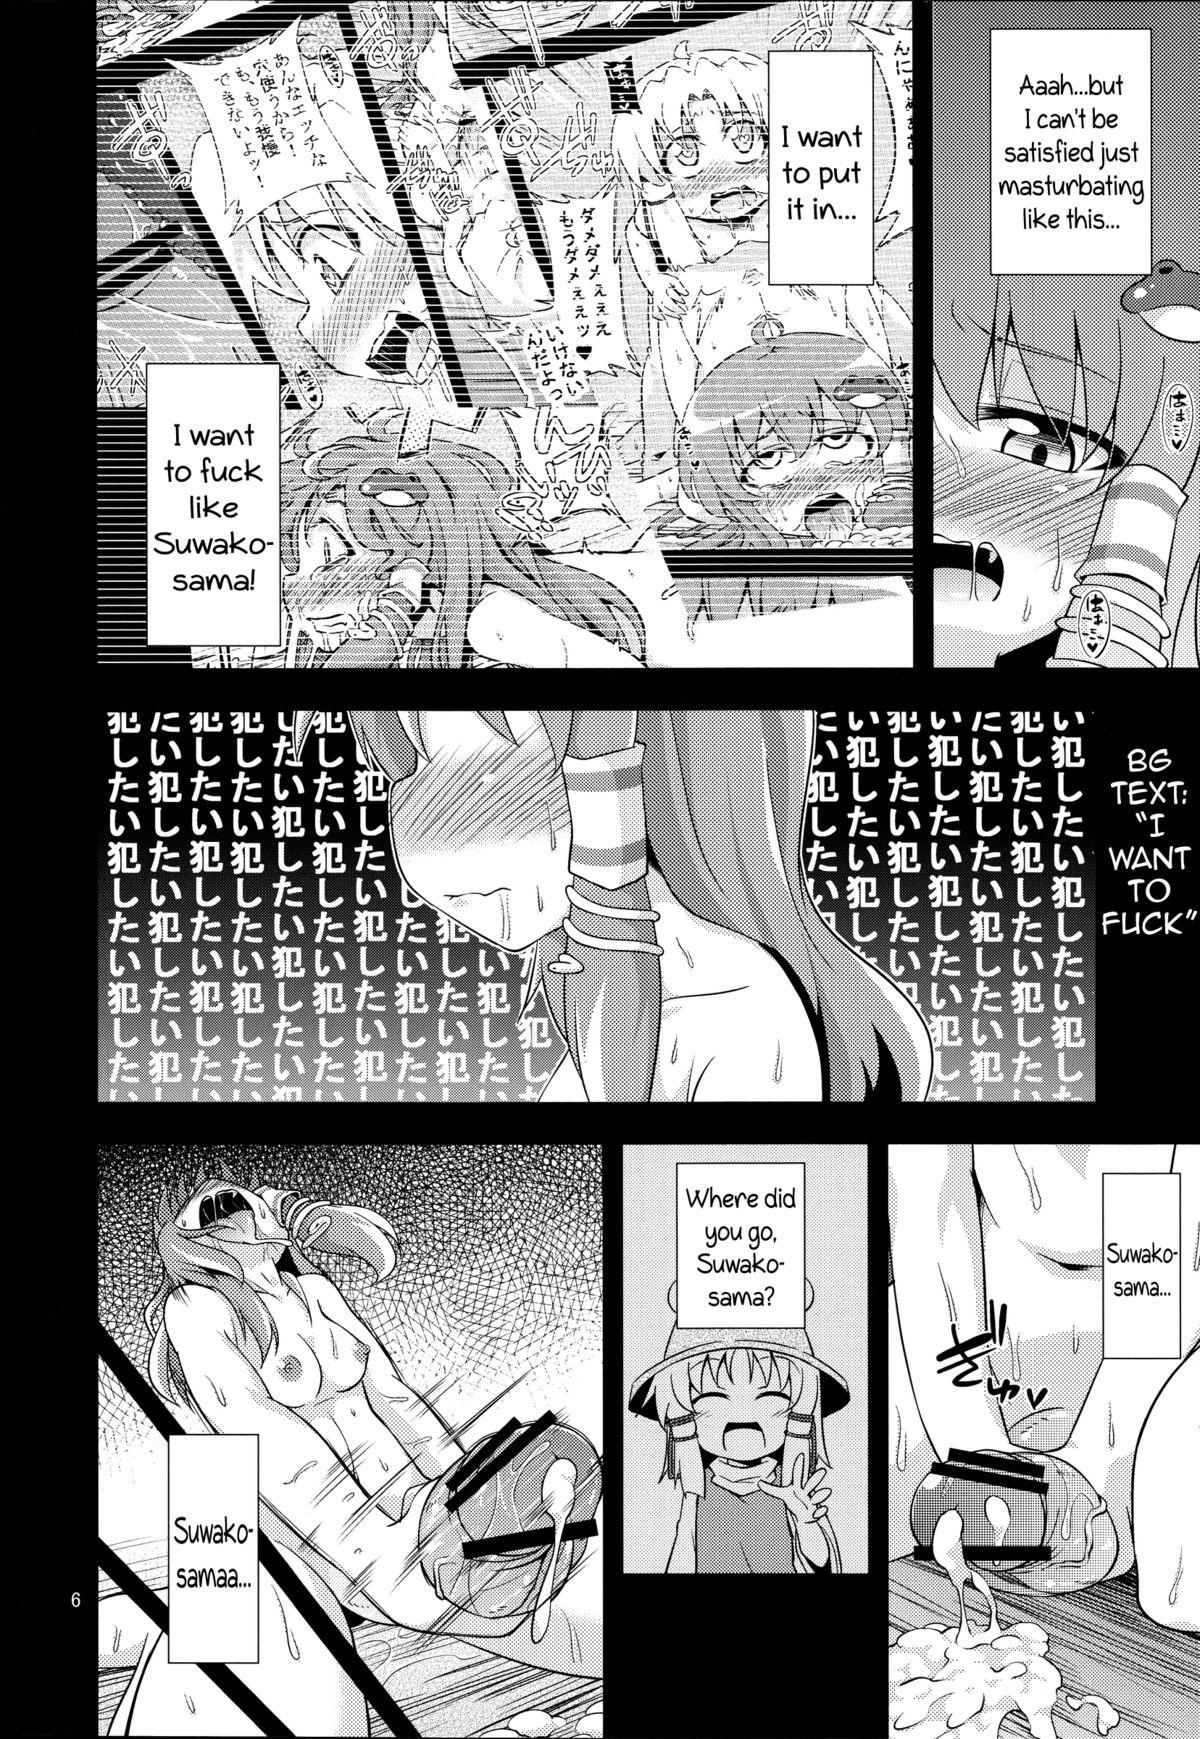 Soft Nikuyokugami Gyoushin ‐ Shrine maiden x Lechery maidens ‐ | Faith in the God of Carnal Desire - Touhou project Small Tits - Page 5